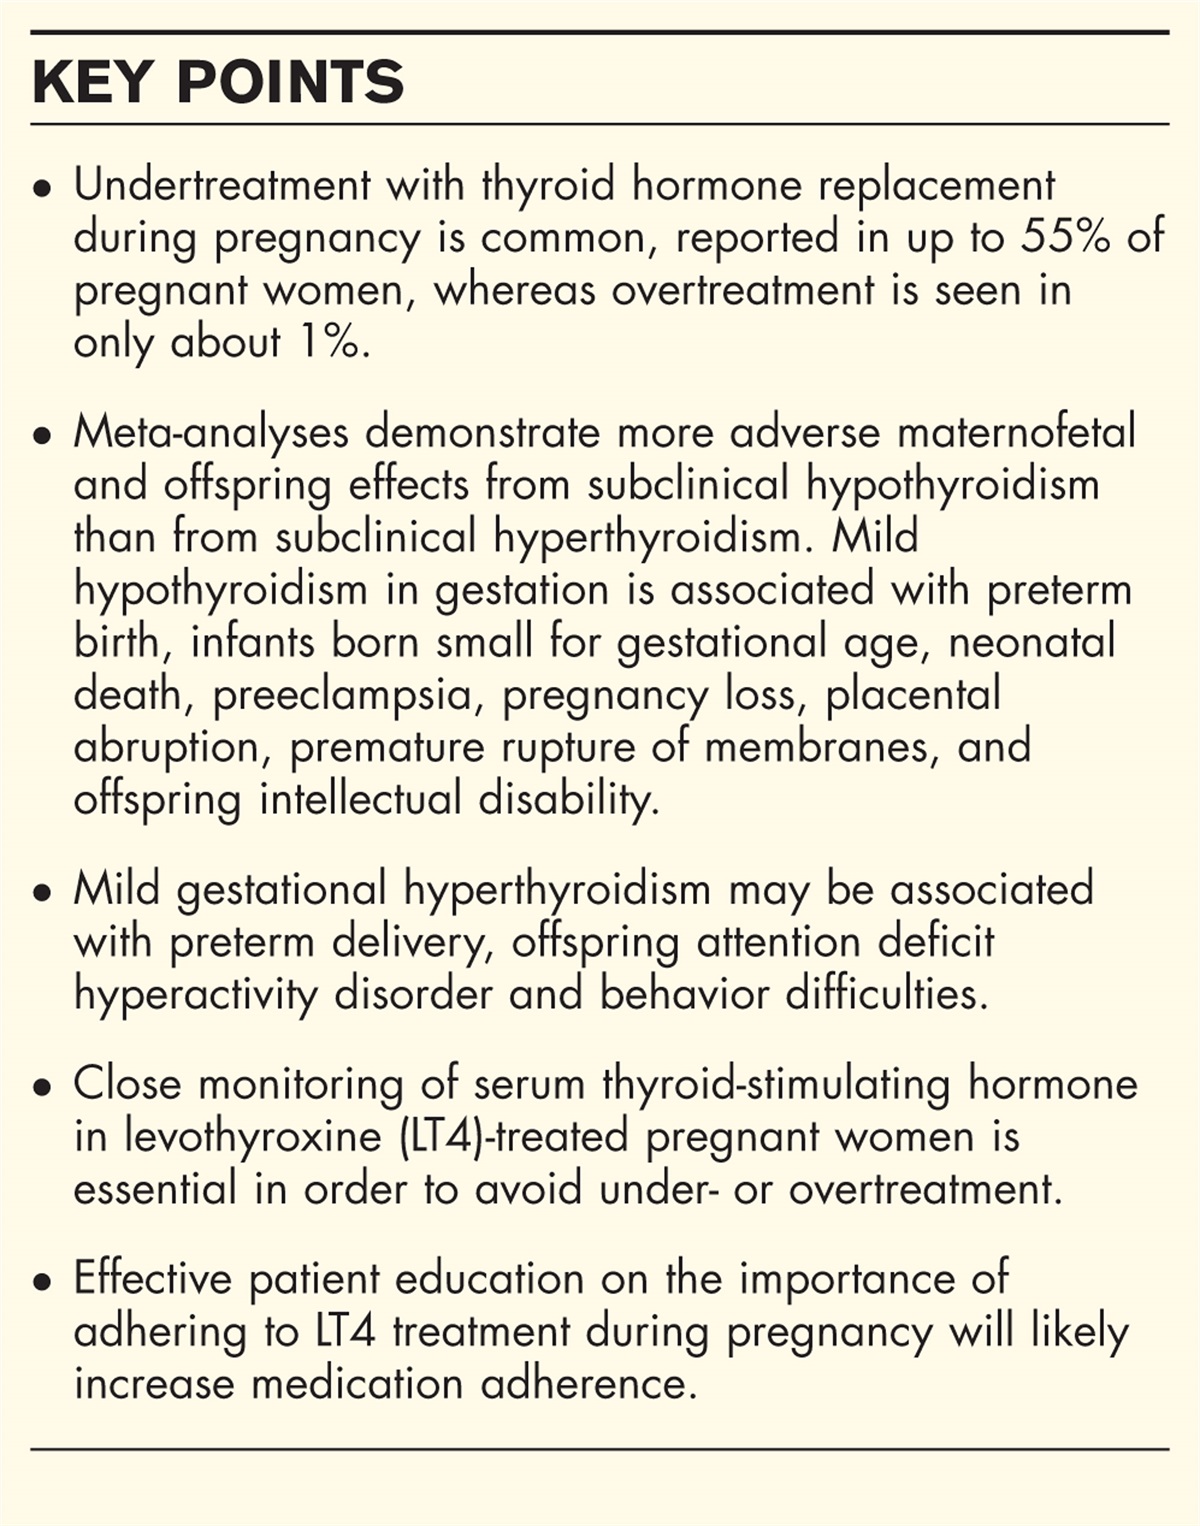 Under and overtreatment with thyroid hormone replacement during pregnancy